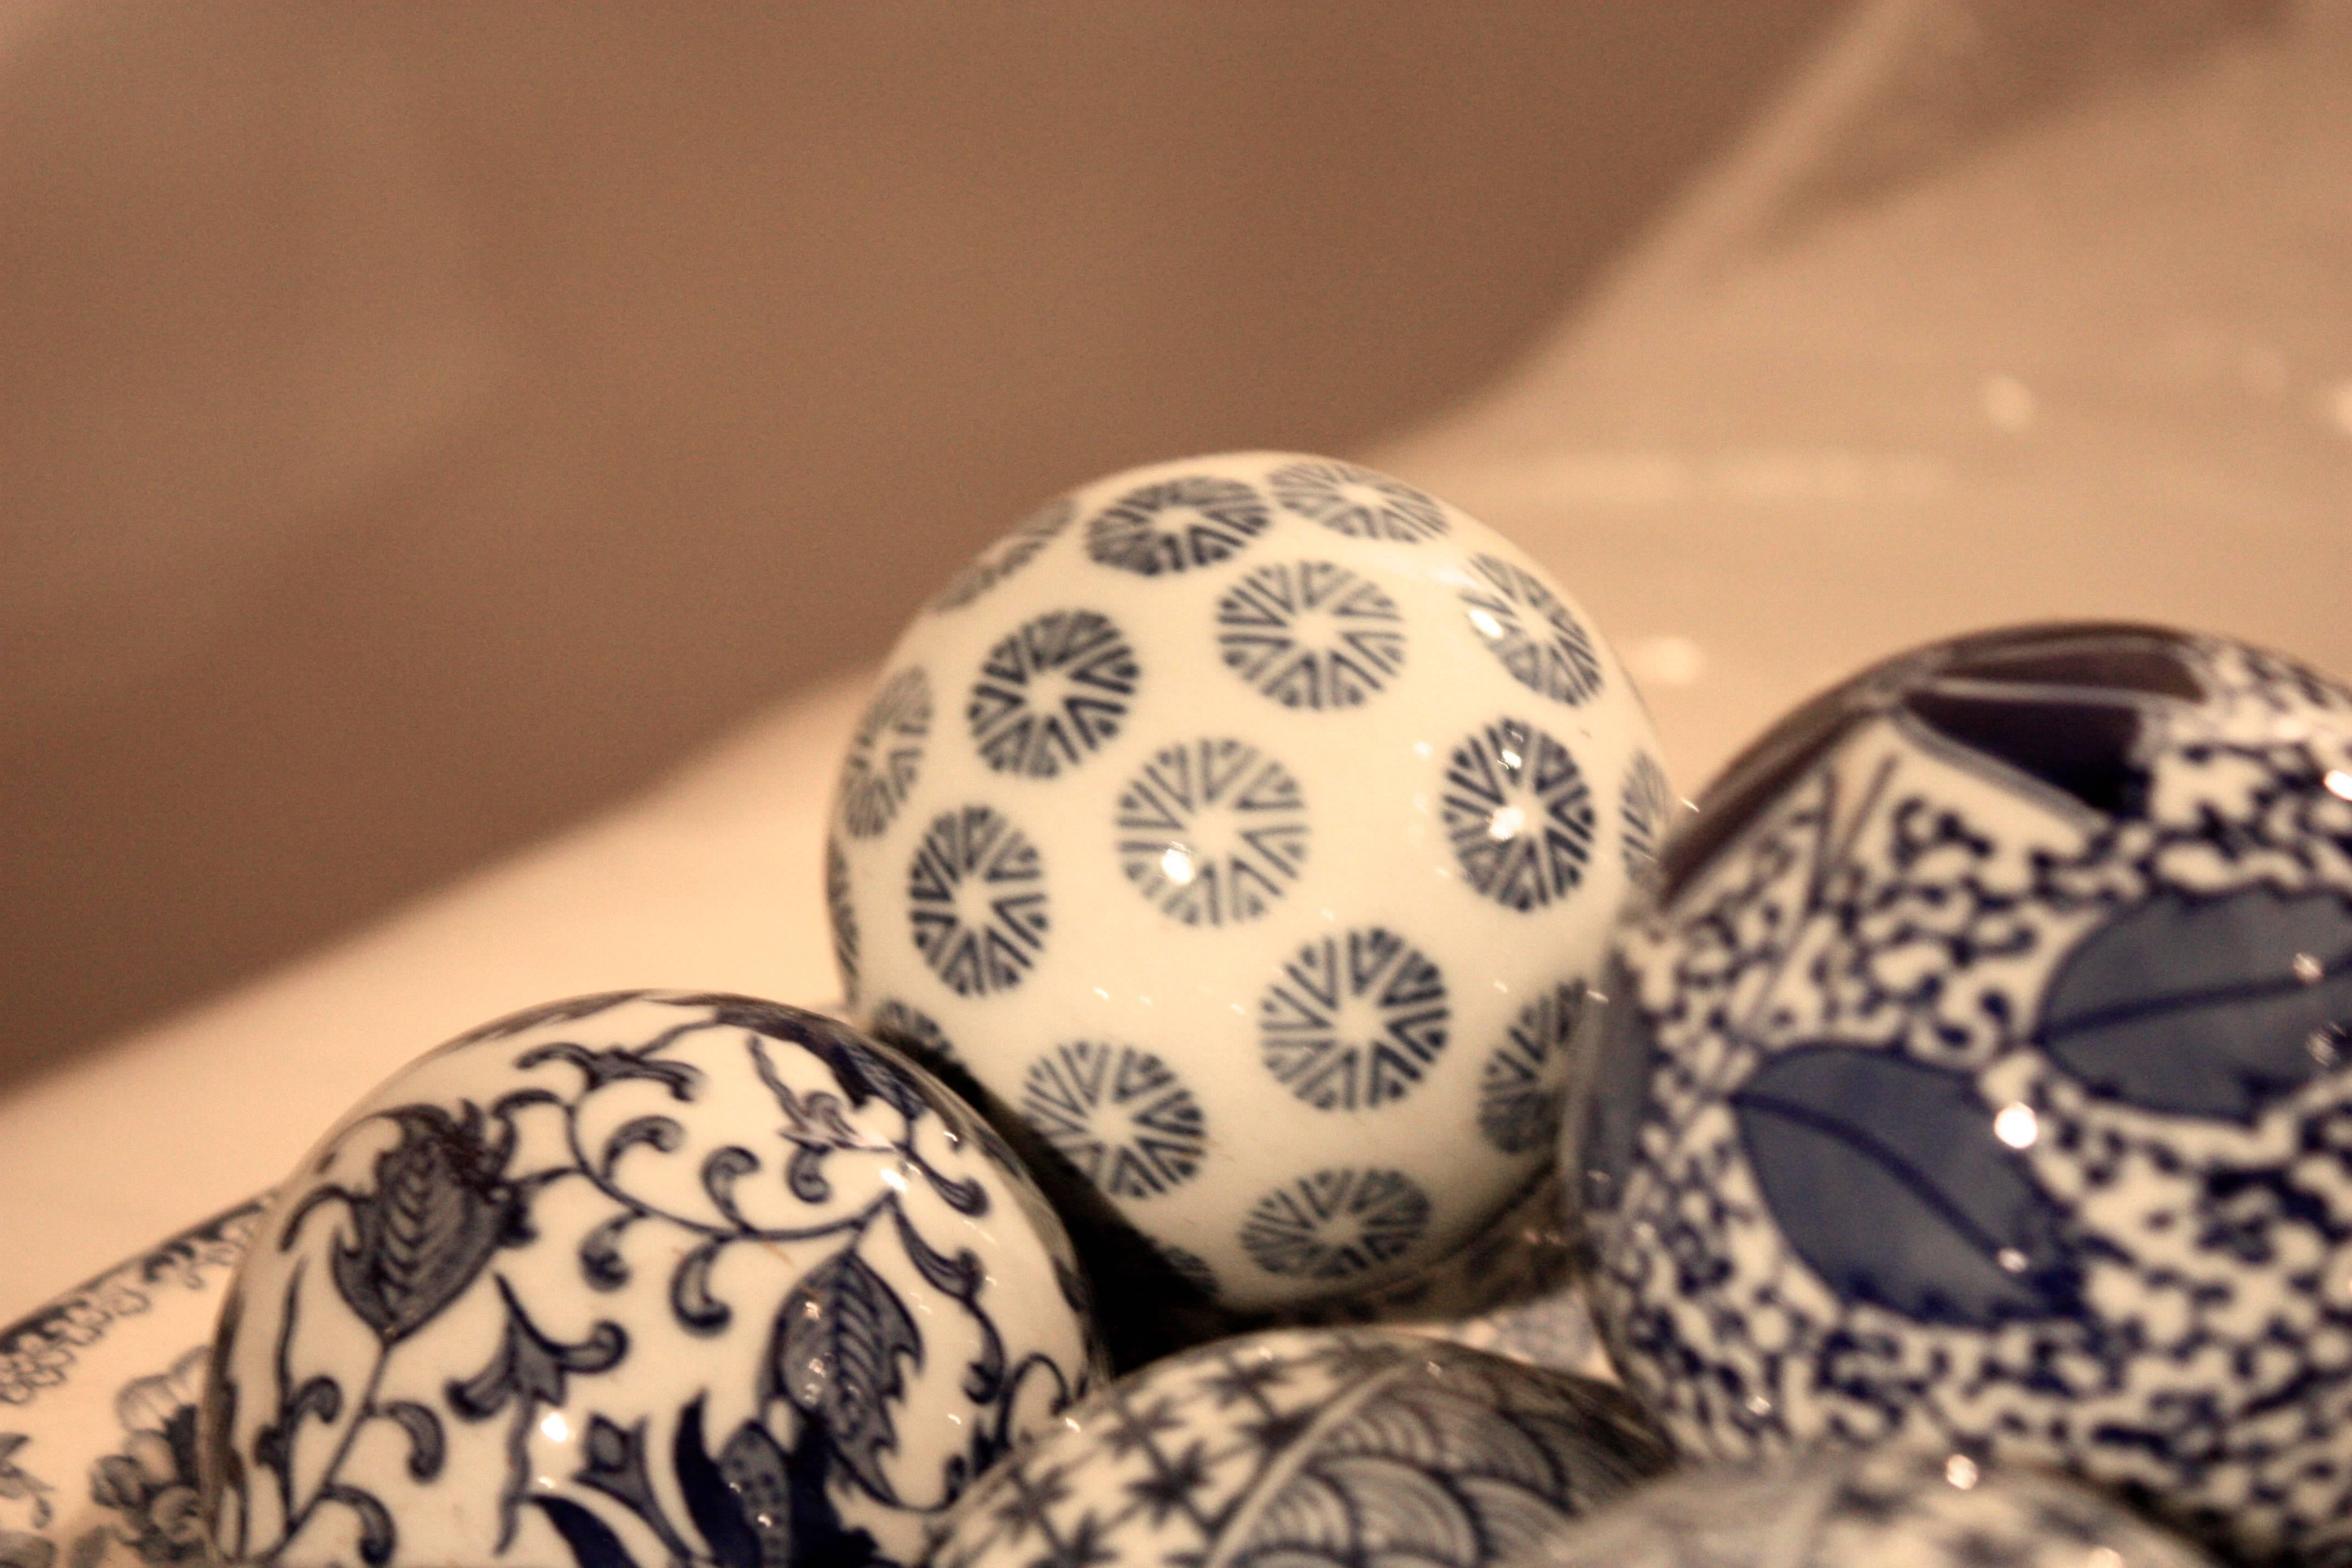 Blue and White Ceramic Bowl with Decorative Balls 1